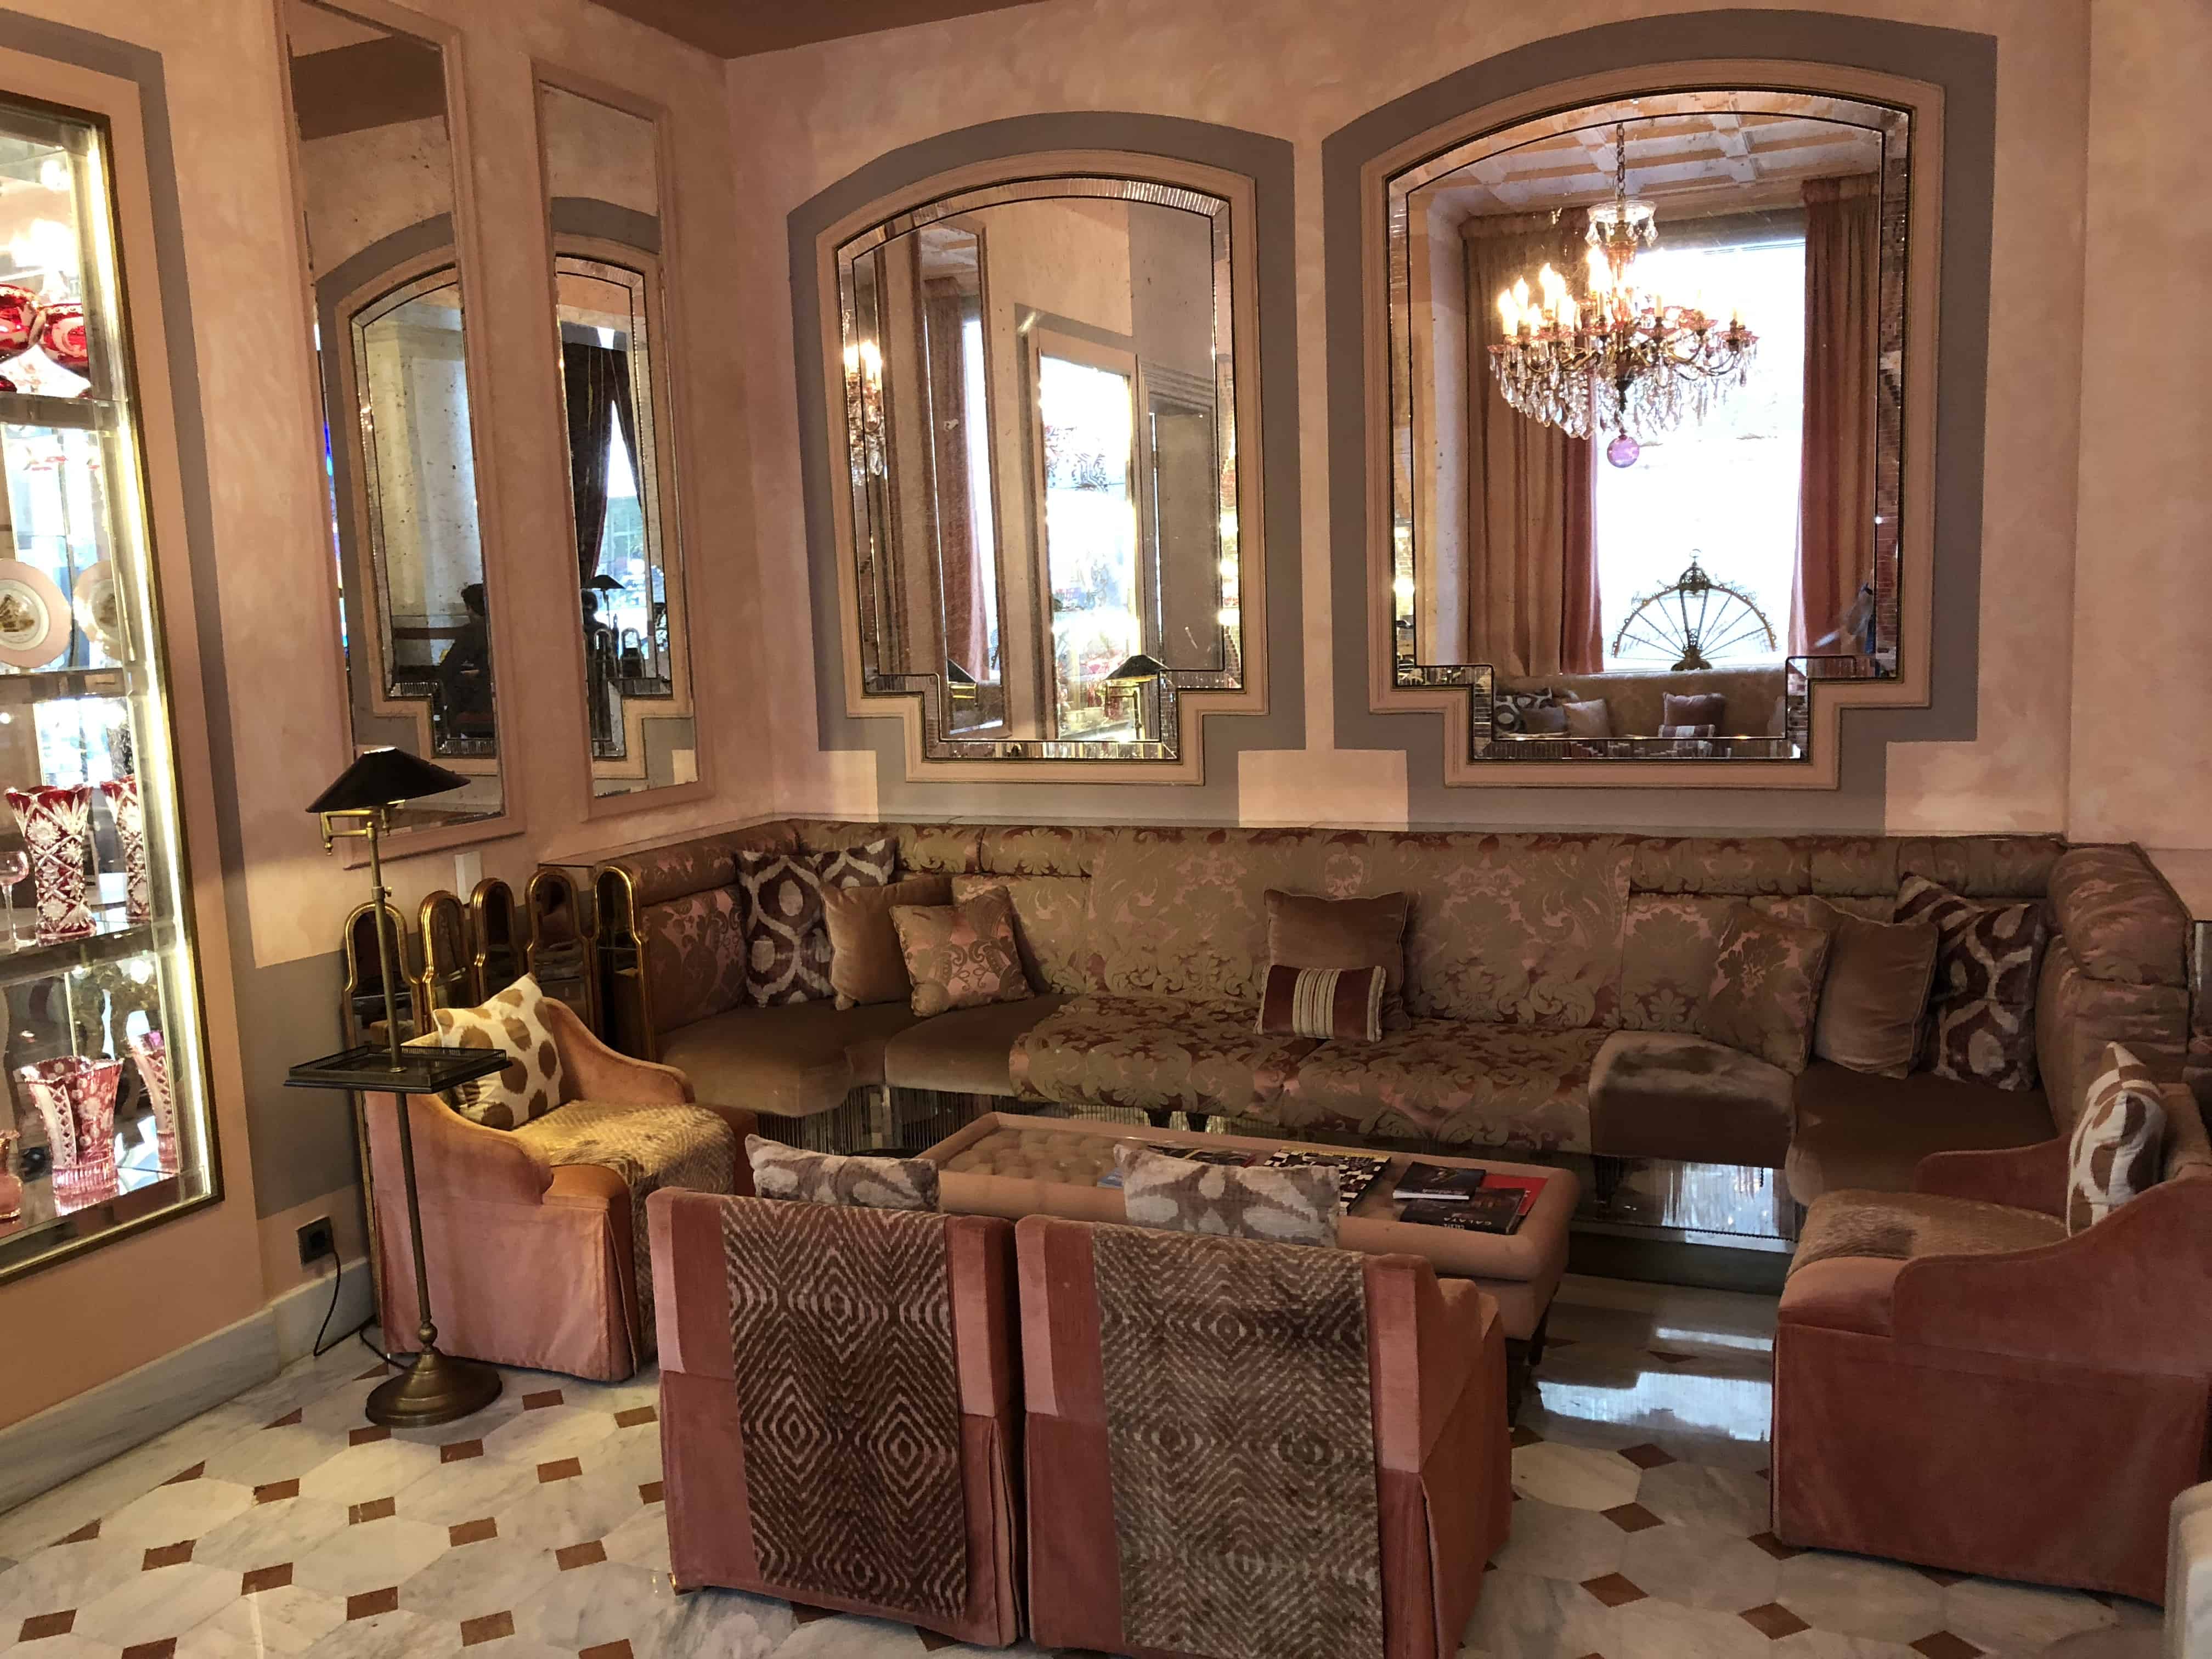 Sitting area at the Patisserie de Pera at the Pera Palace Hotel in Istanbul, Turkey